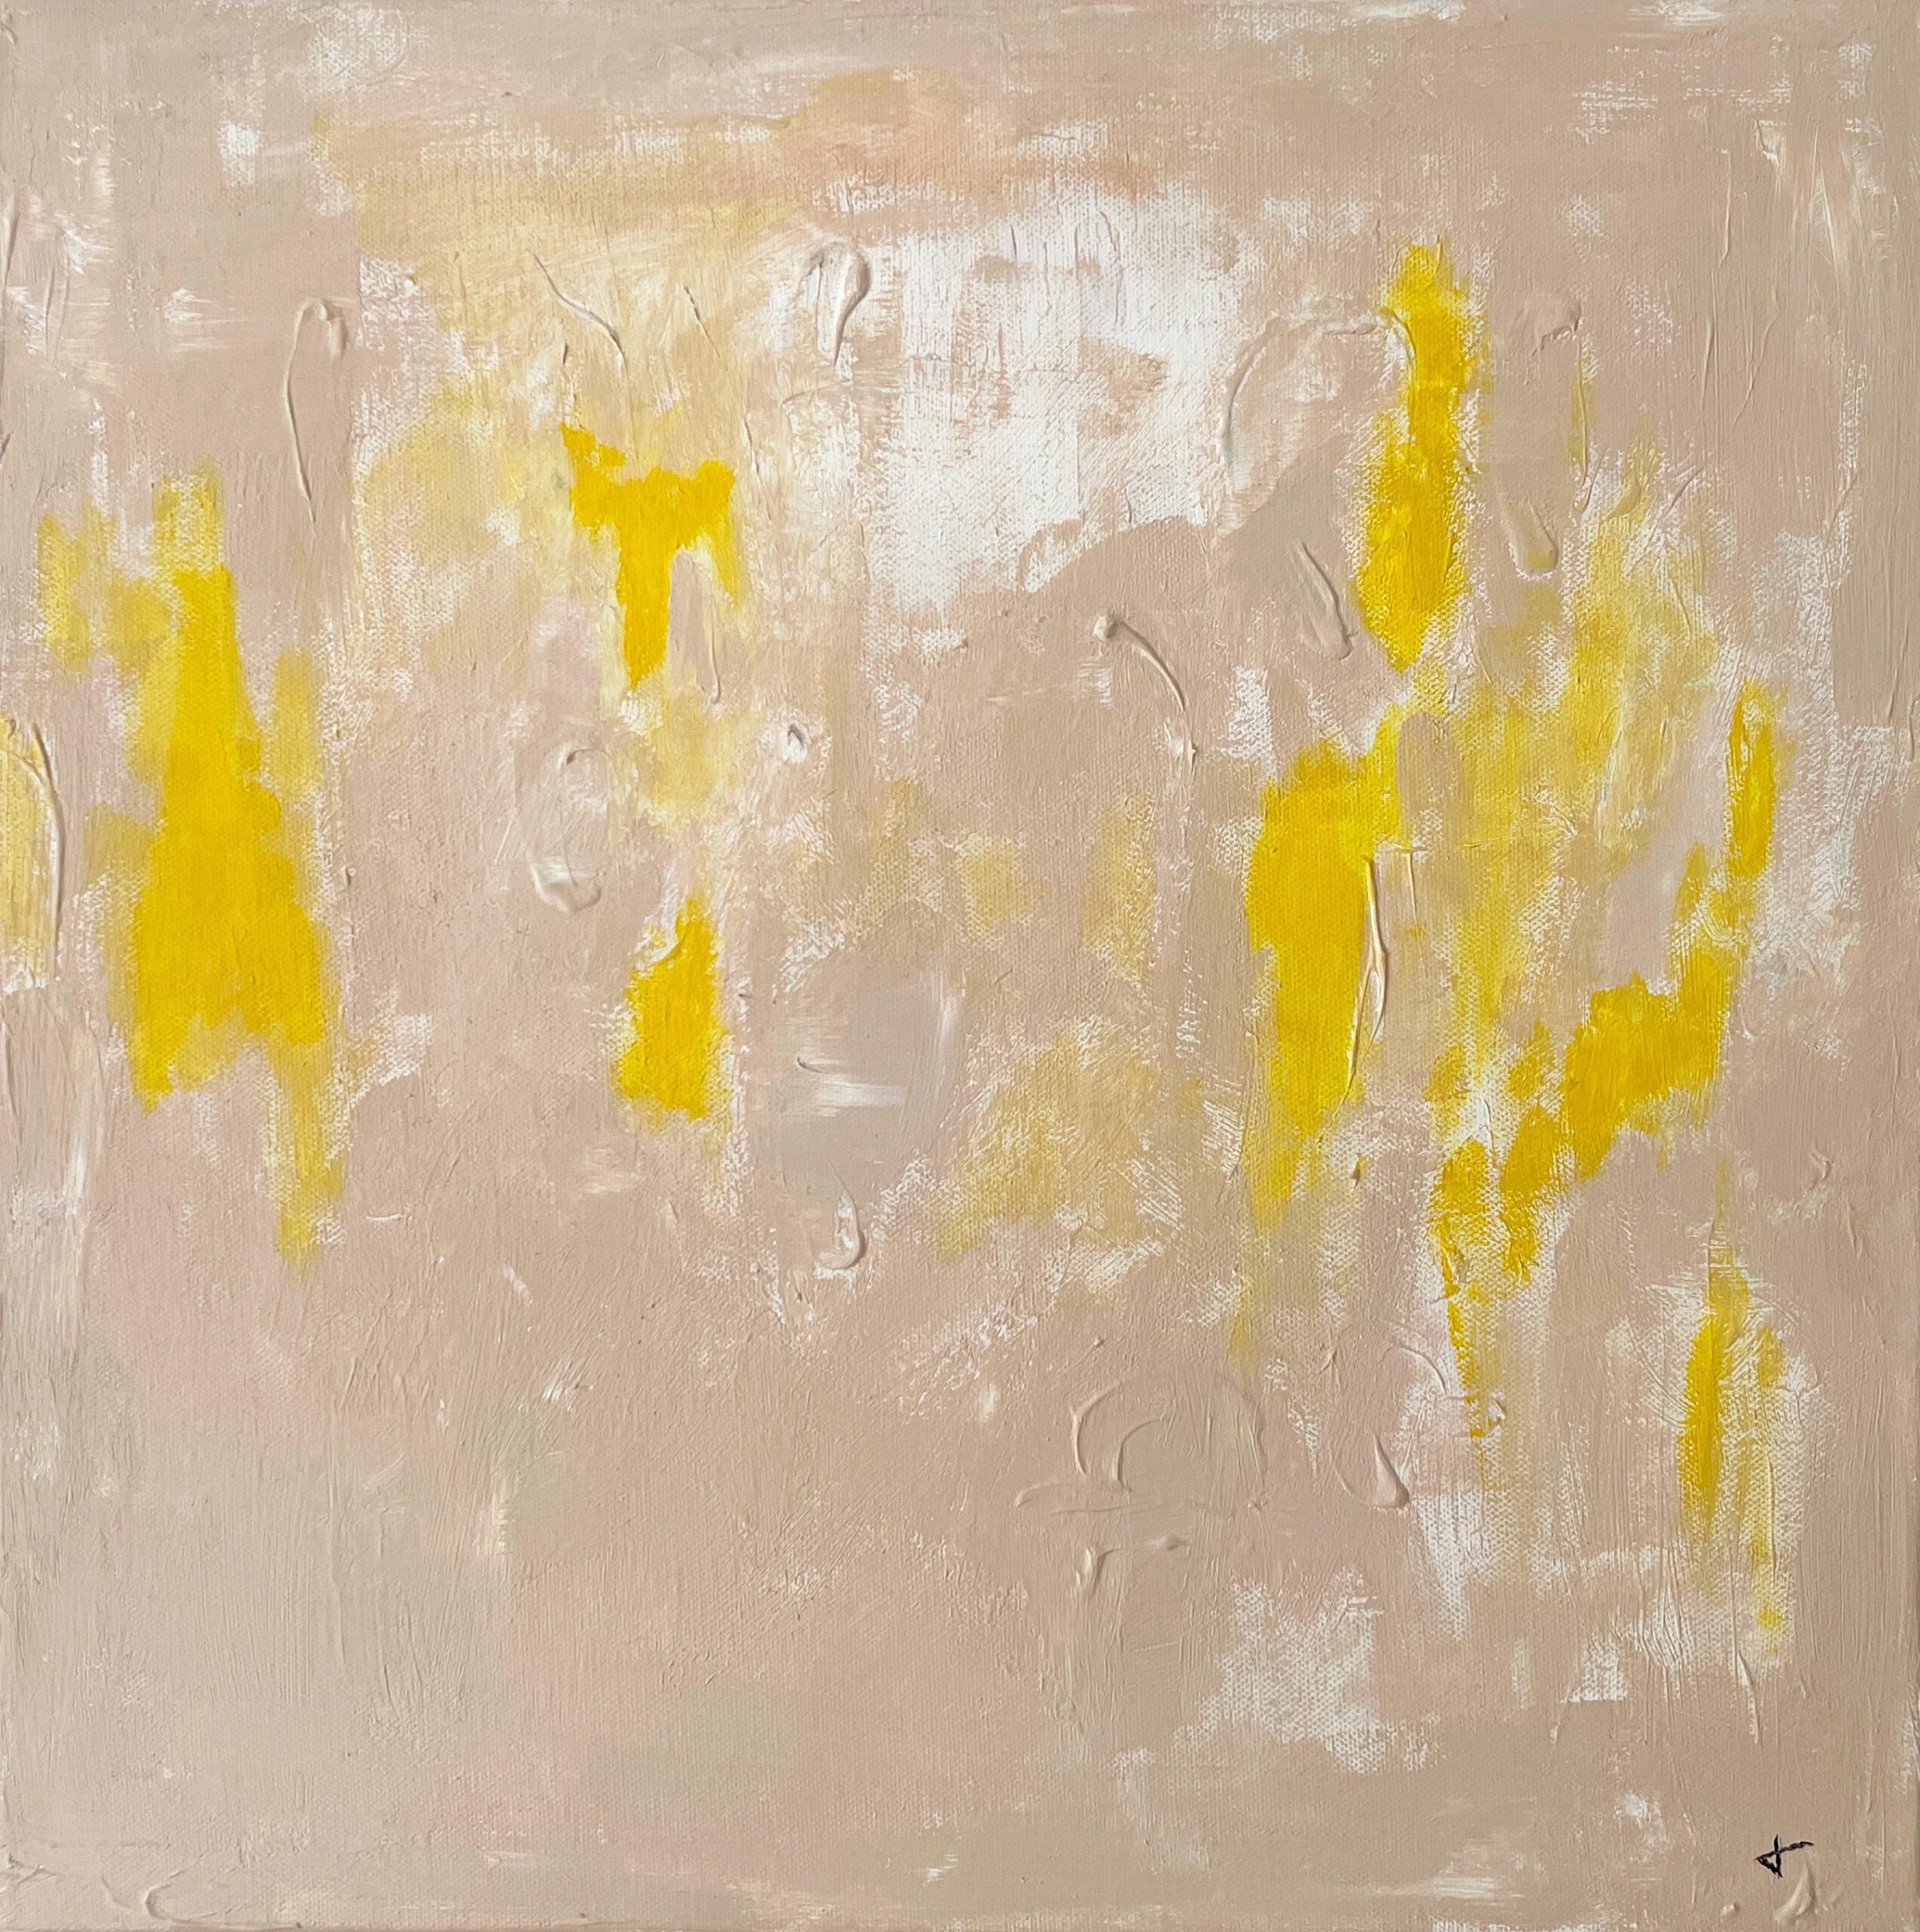 LE NUMÉRO 11 - Painting by Elise Tsikis